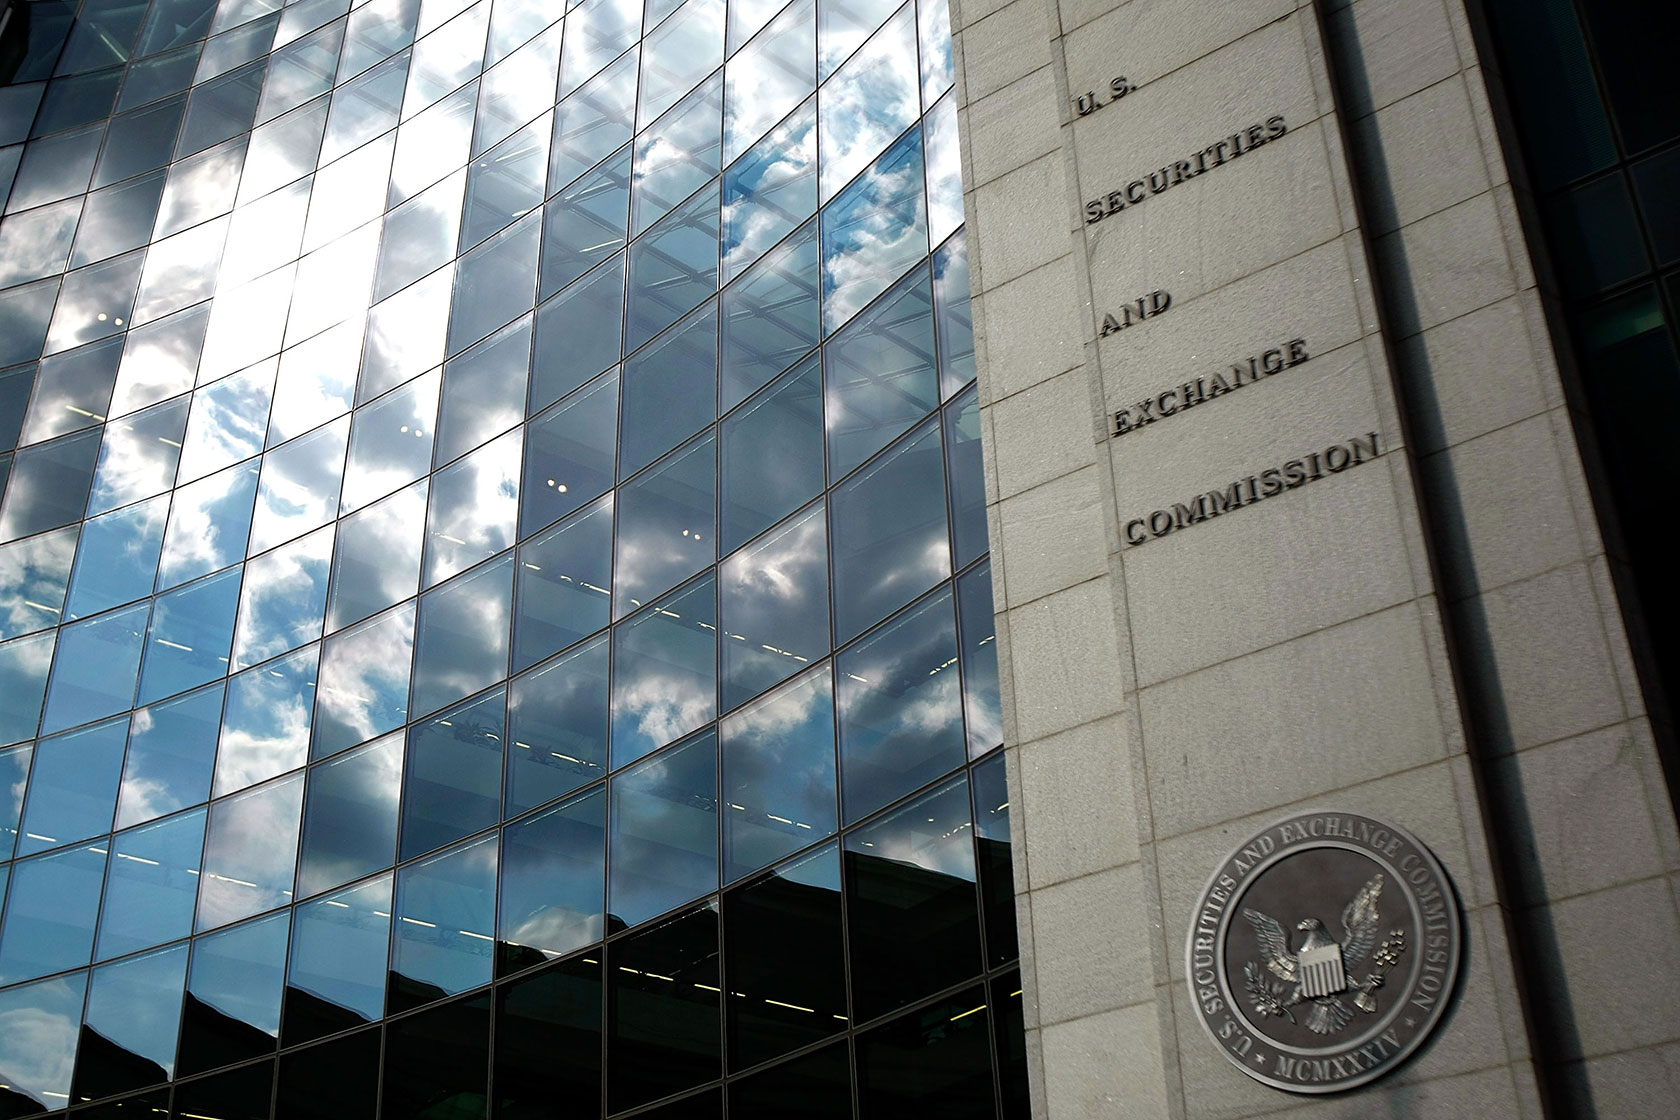 The U.S. Securities and Exchange Commission seal hangs on the facade of its building.